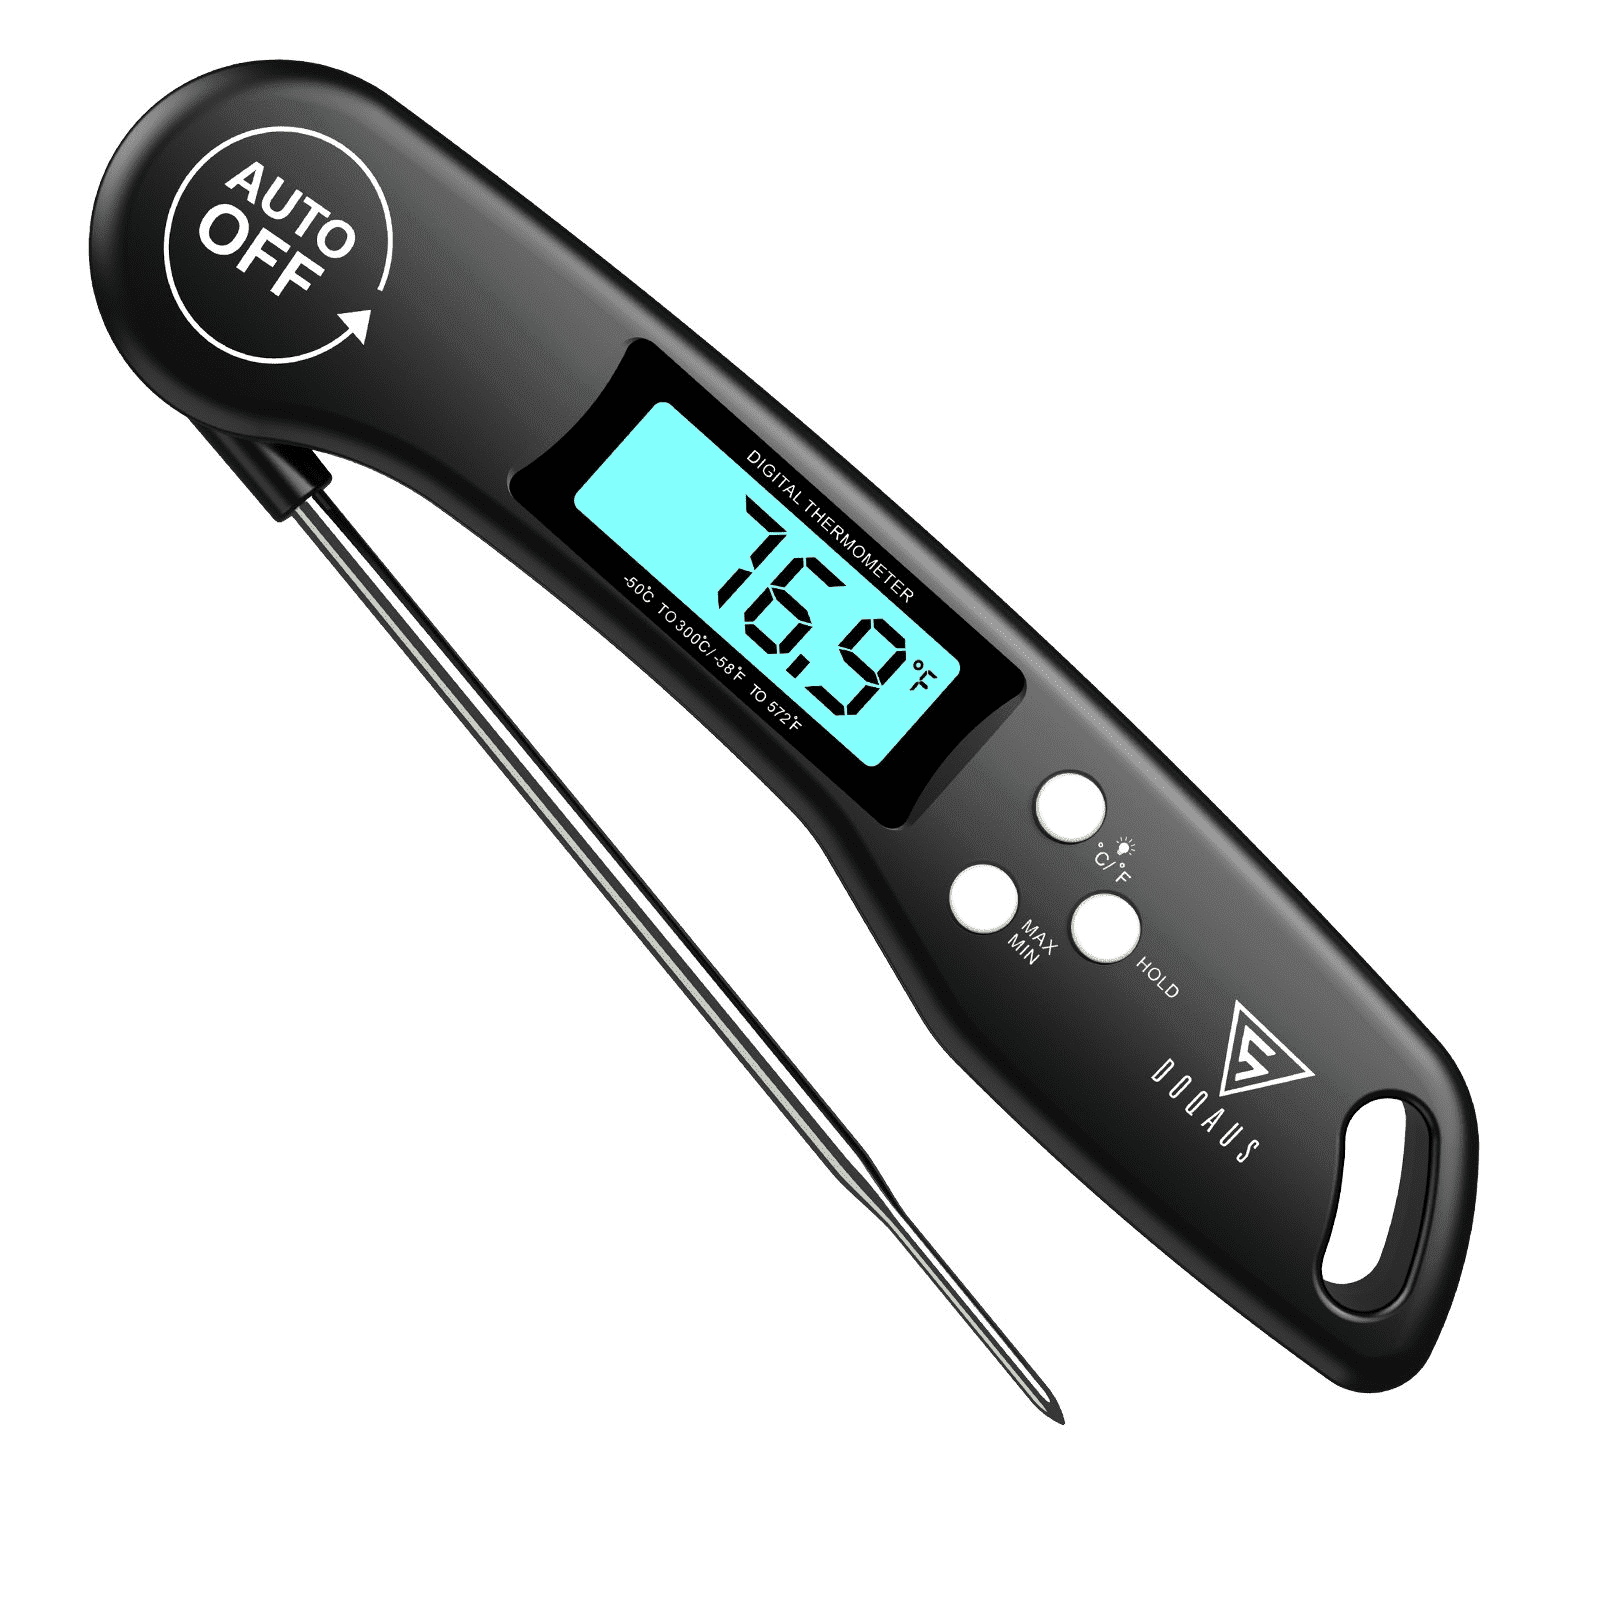 Engsav Digital Meat Thermometer Instant Read, Meat Thermometer for Kitchen,  Cooking, Grilling, Turkey, Steak, Wireless Temperature Probe with